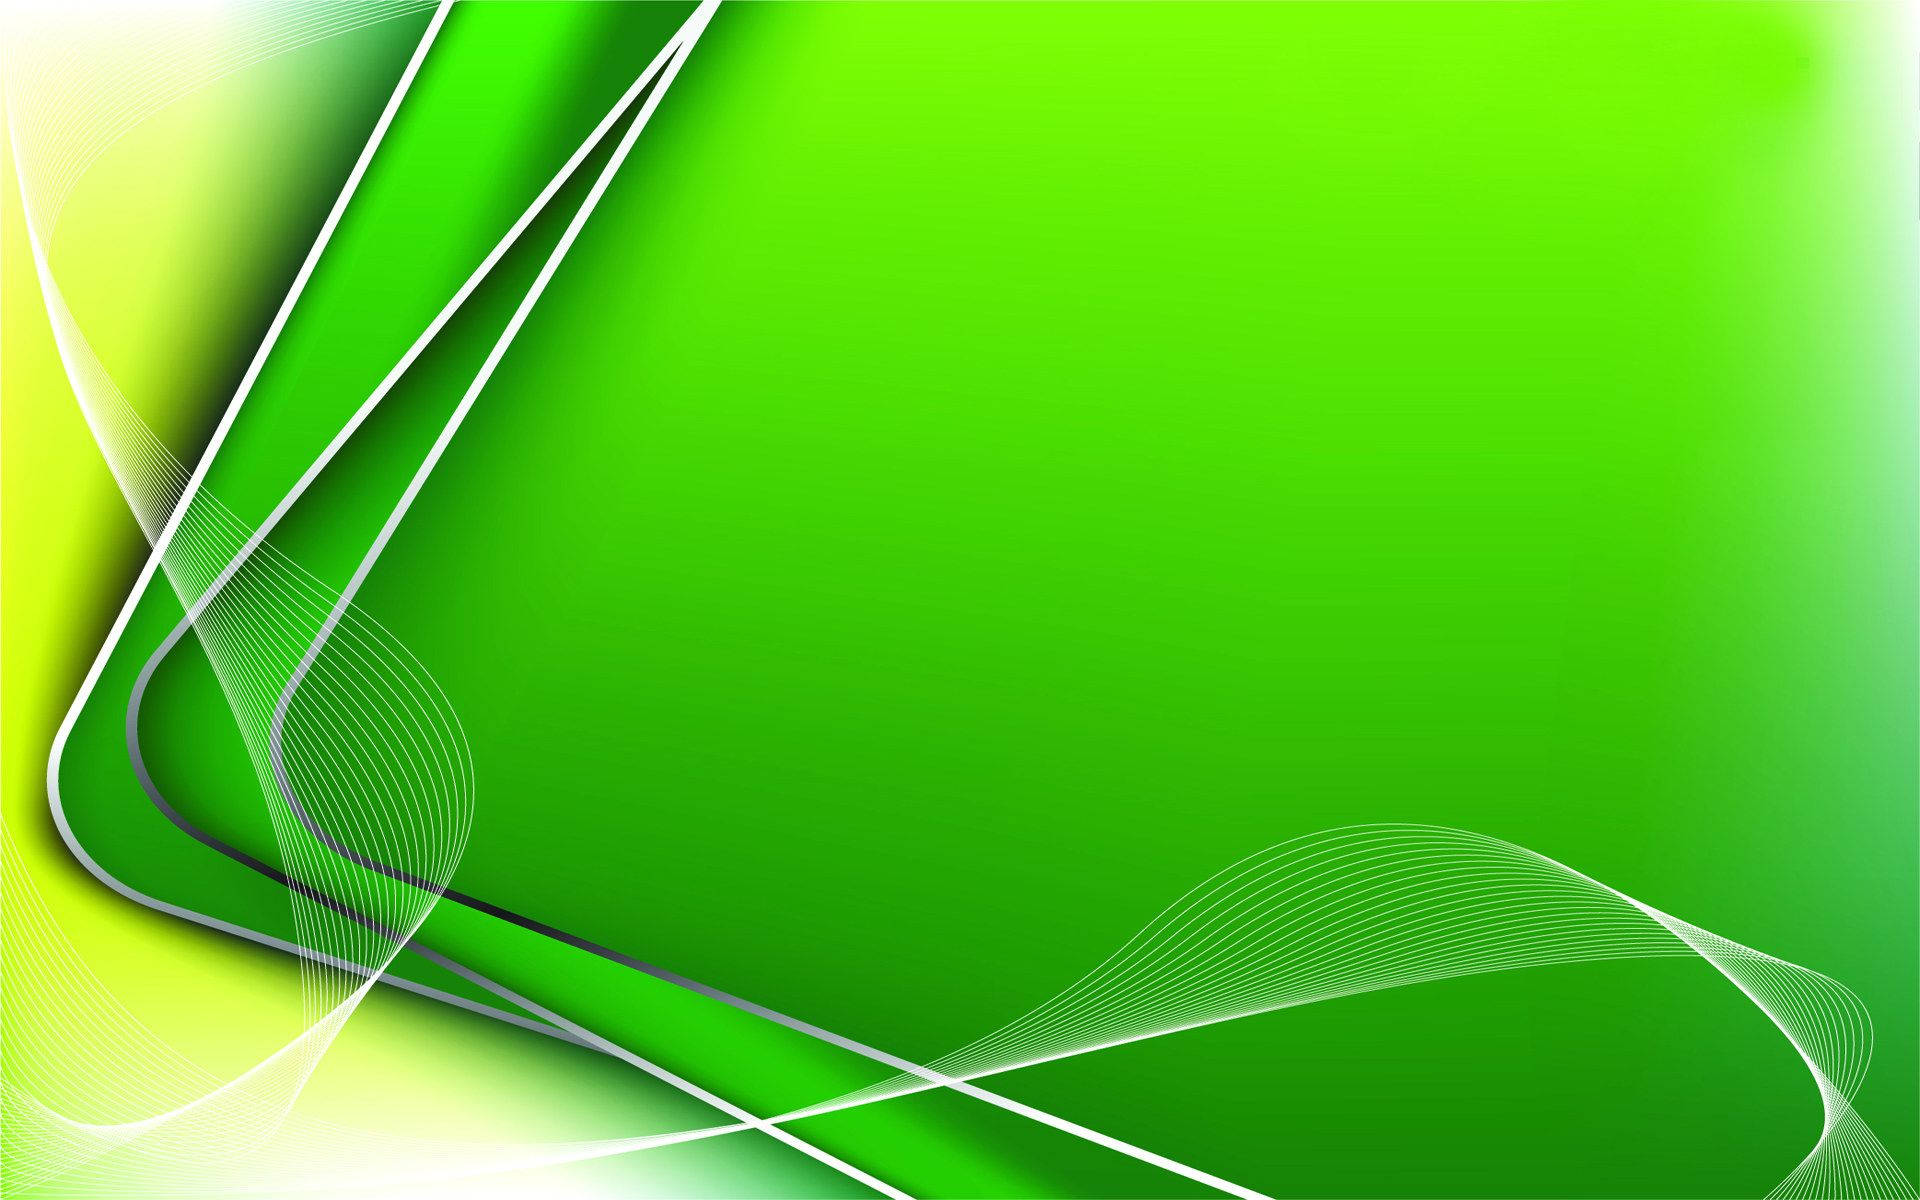 Bending Green Abstract Lines